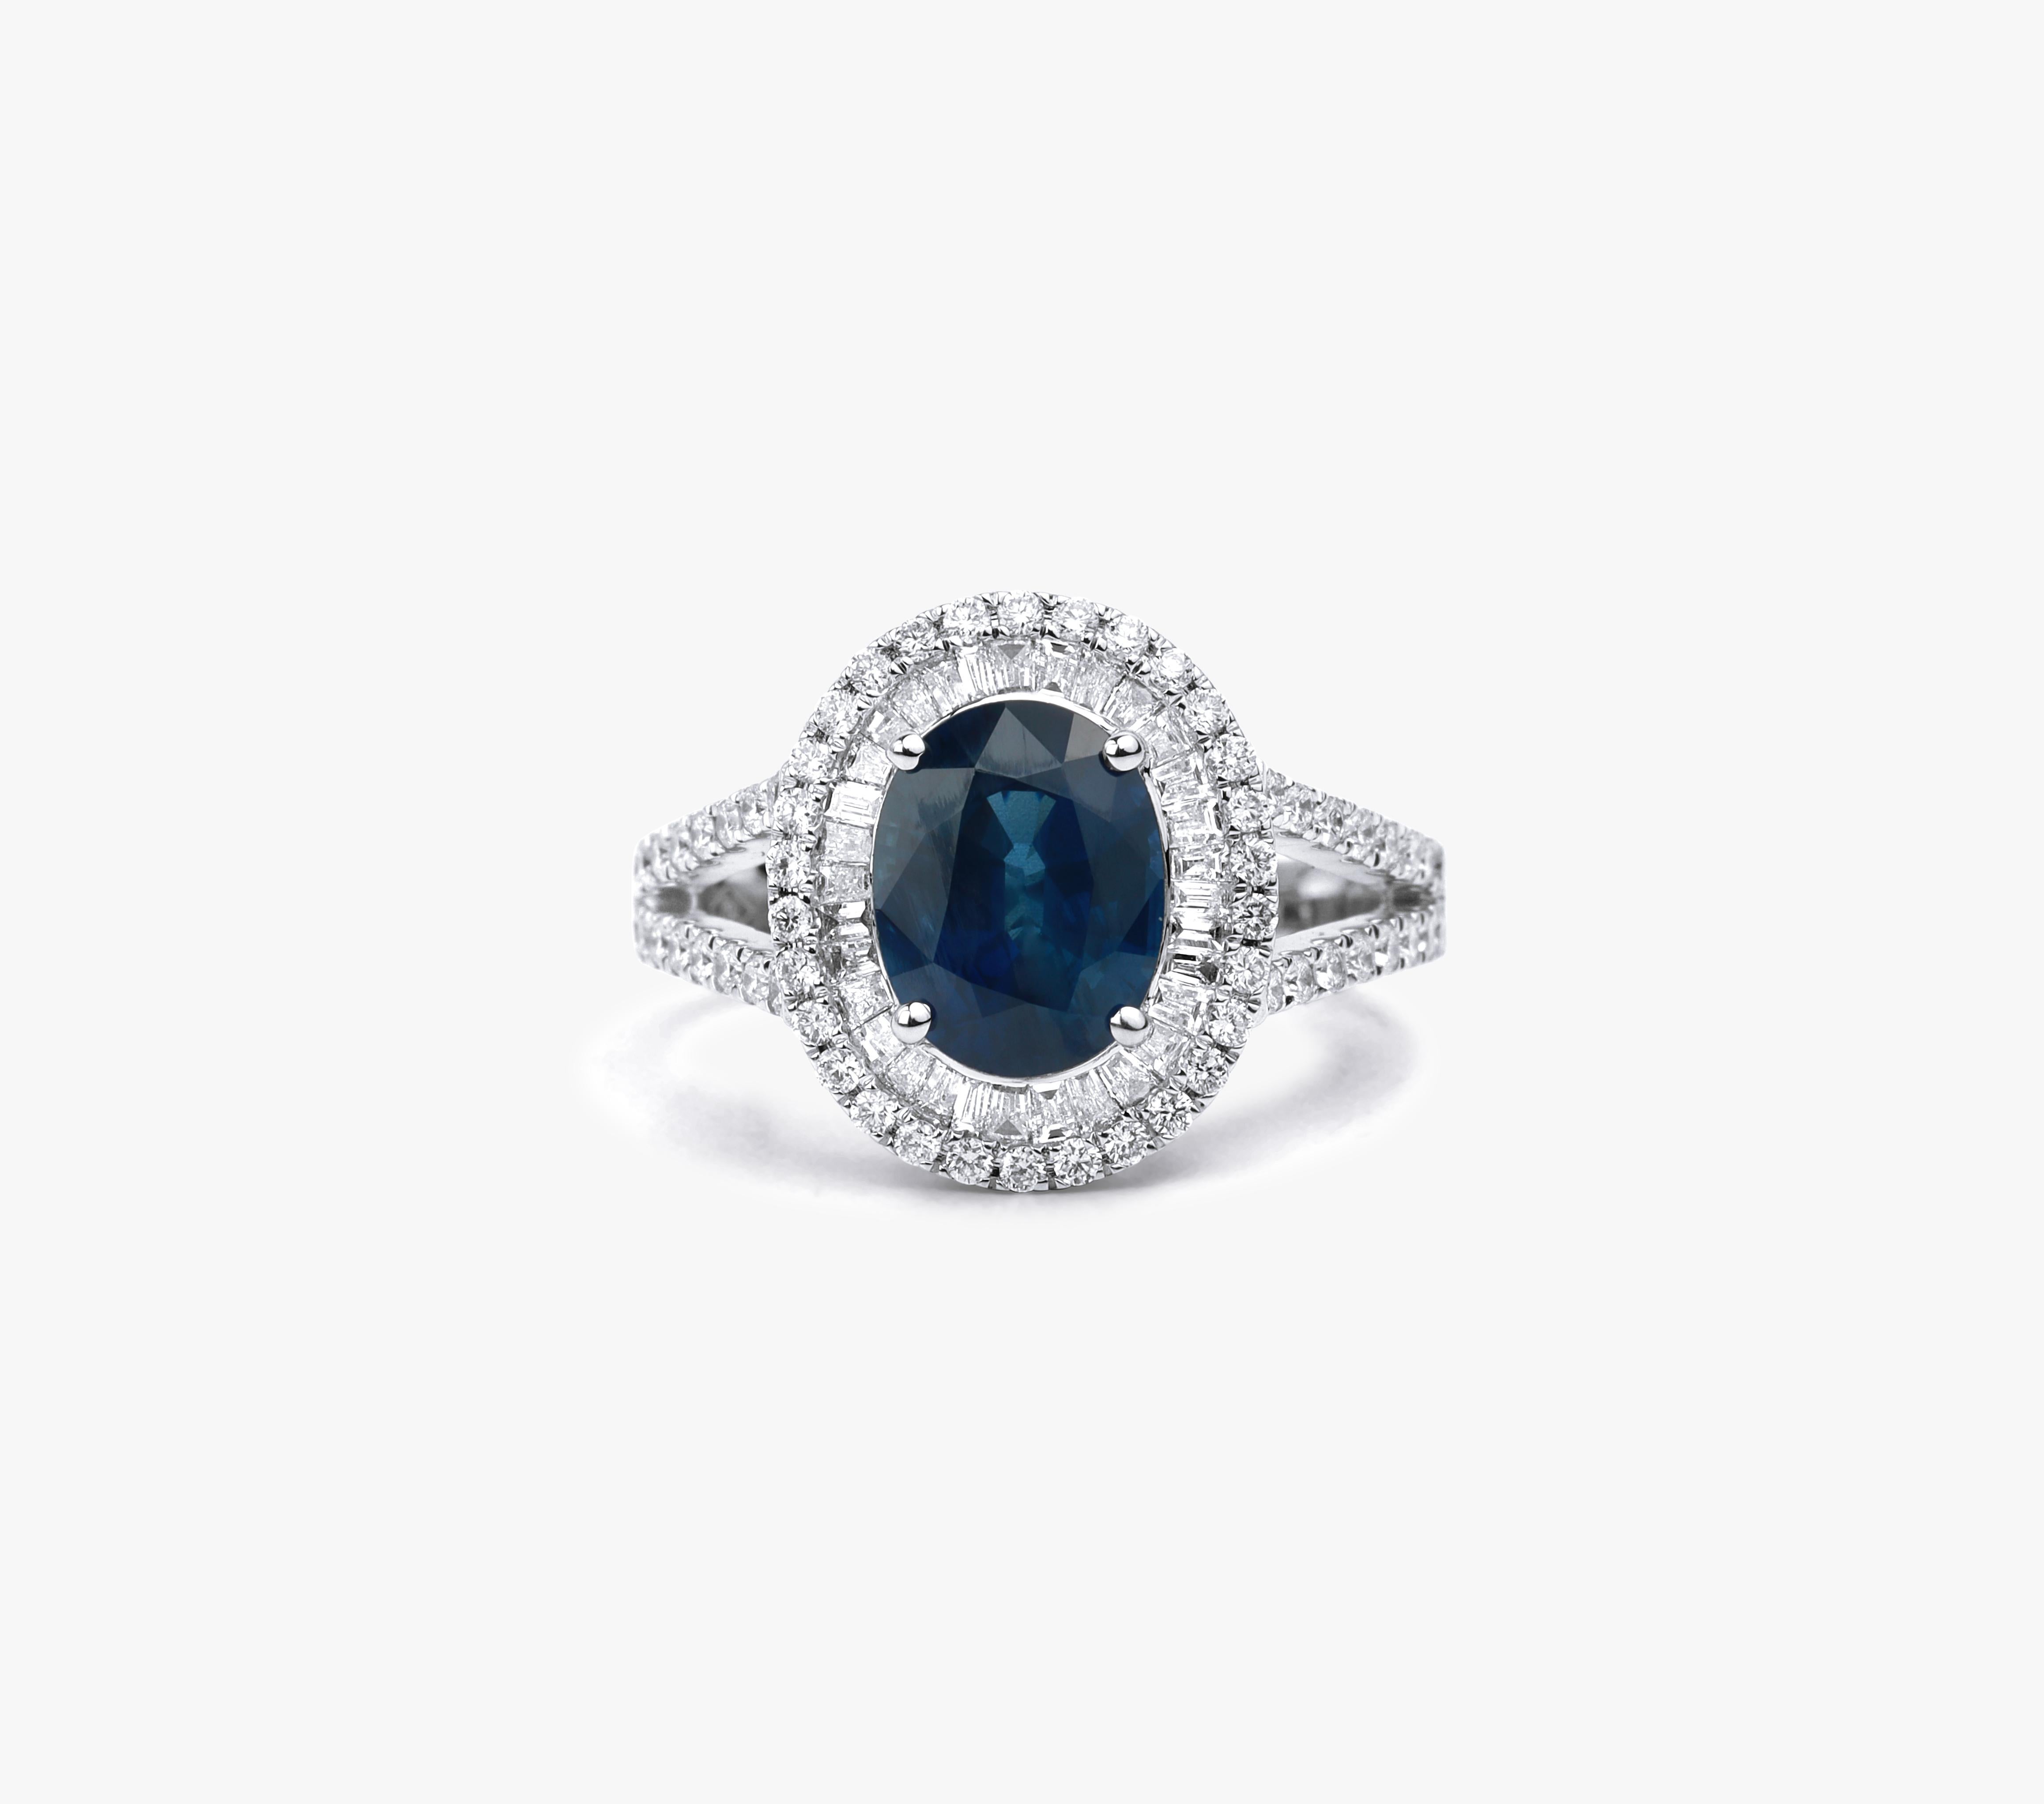 Oval Blue Sapphire Diamond Double Halo Cocktail Engagement Ring in White Gold

Available in 18k white gold.

Same design can be made also with other custom gemstones per request.

Product details:

- Solid gold

- Diamond - approx. 0.83 carat

-